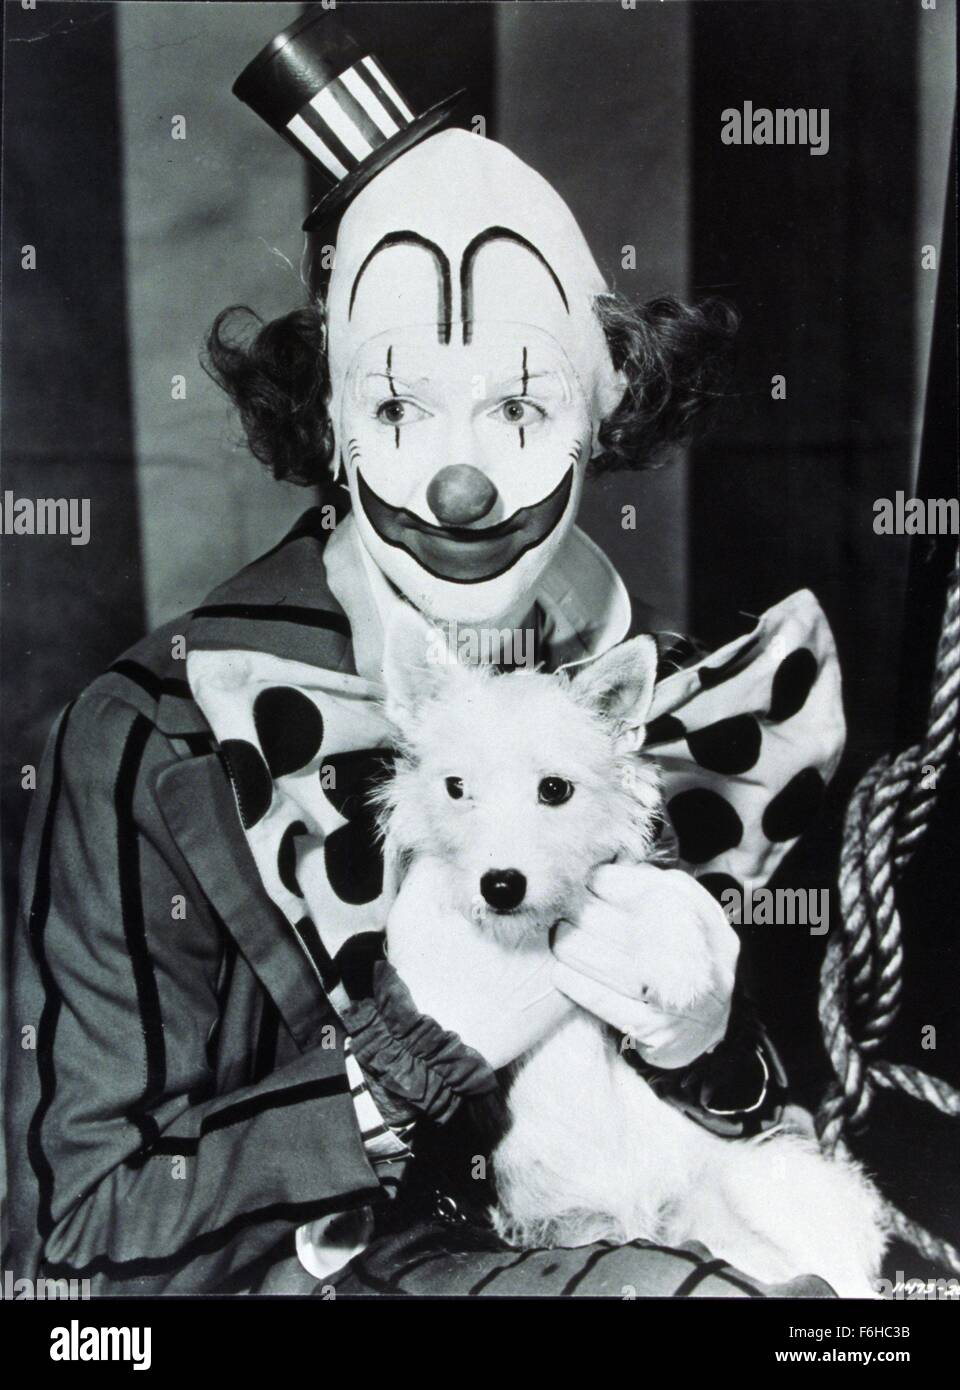 1952, Film Title: GREATEST SHOW ON EARTH, Director: CECIL B DeMILLE, Studio: PARAMOUNT, Pictured: ANIMALS (WITH ACTORS), CLOTHING, CLOWN, CLOWN MAKEUP, CECIL B DeMILLE, DOG. (Credit Image: SNAP) Stock Photo